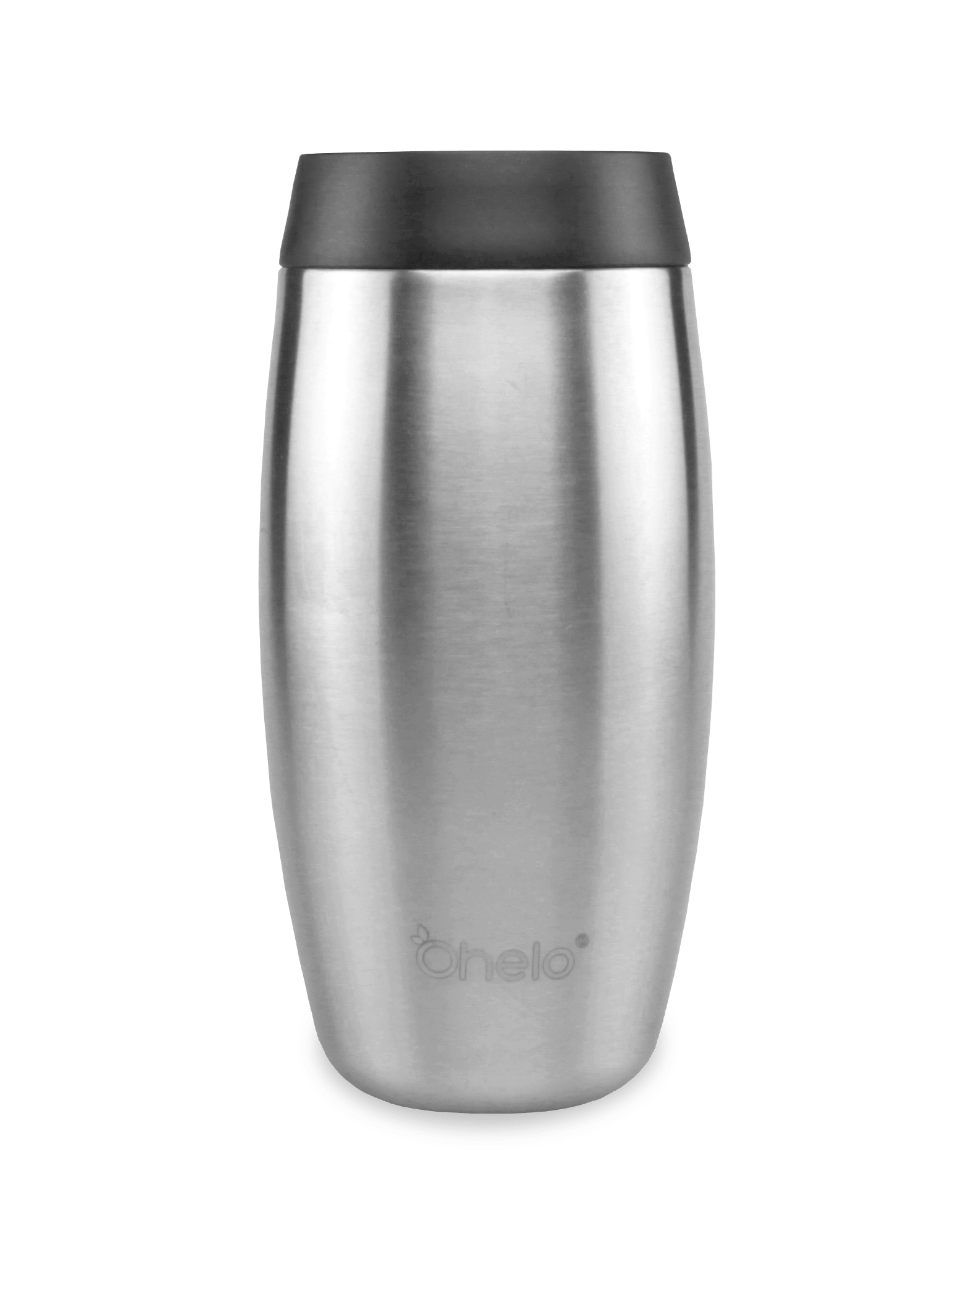 Ohelo dishwasher safe reusable coffee cup in stainless steel